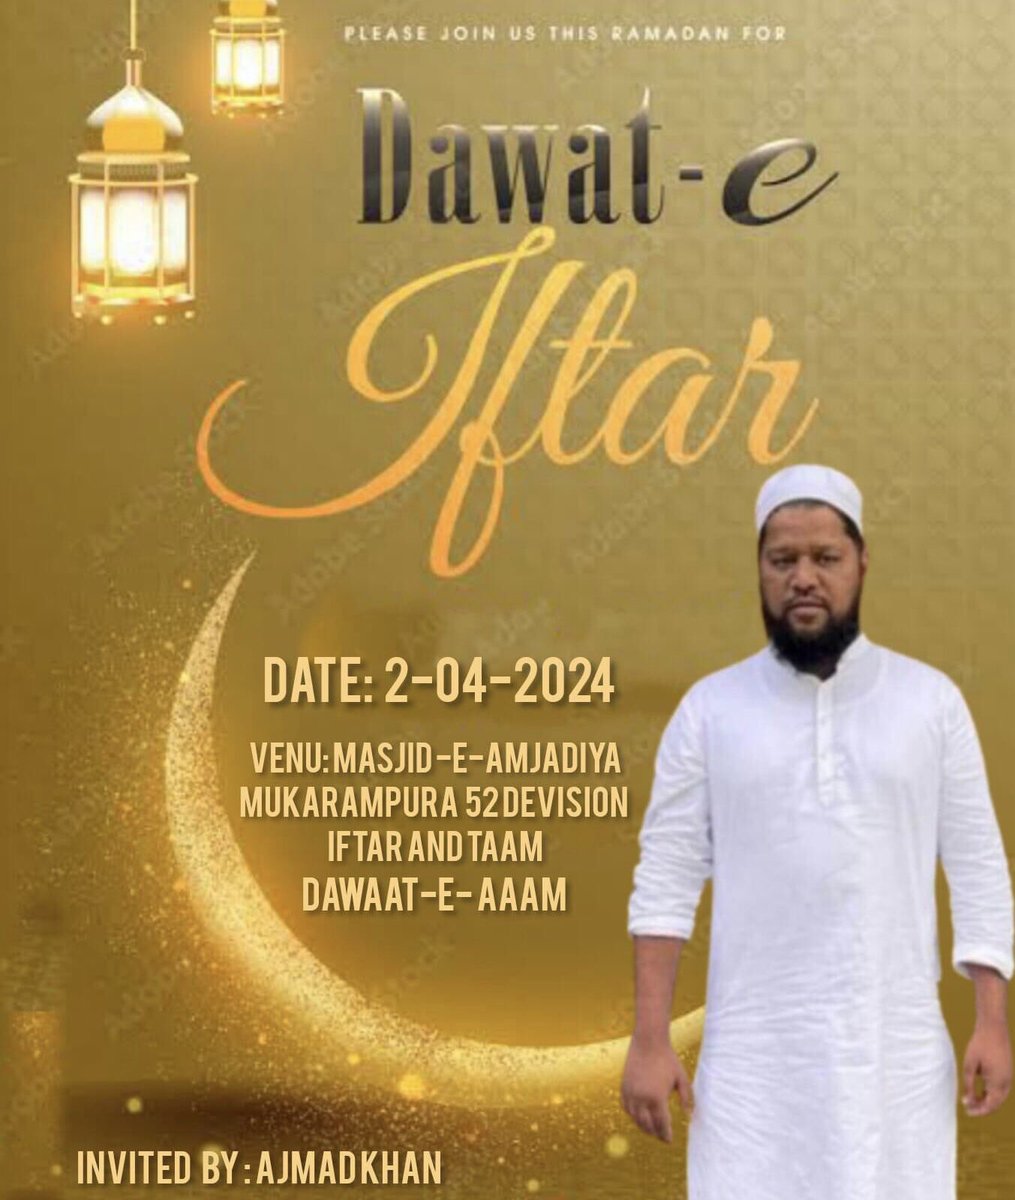 Dawat e Iftar moments are the most blessing moments so try to avail the blessings of Allah during these moments.
#IftarParty #Amjadkhan #dawaatEaam